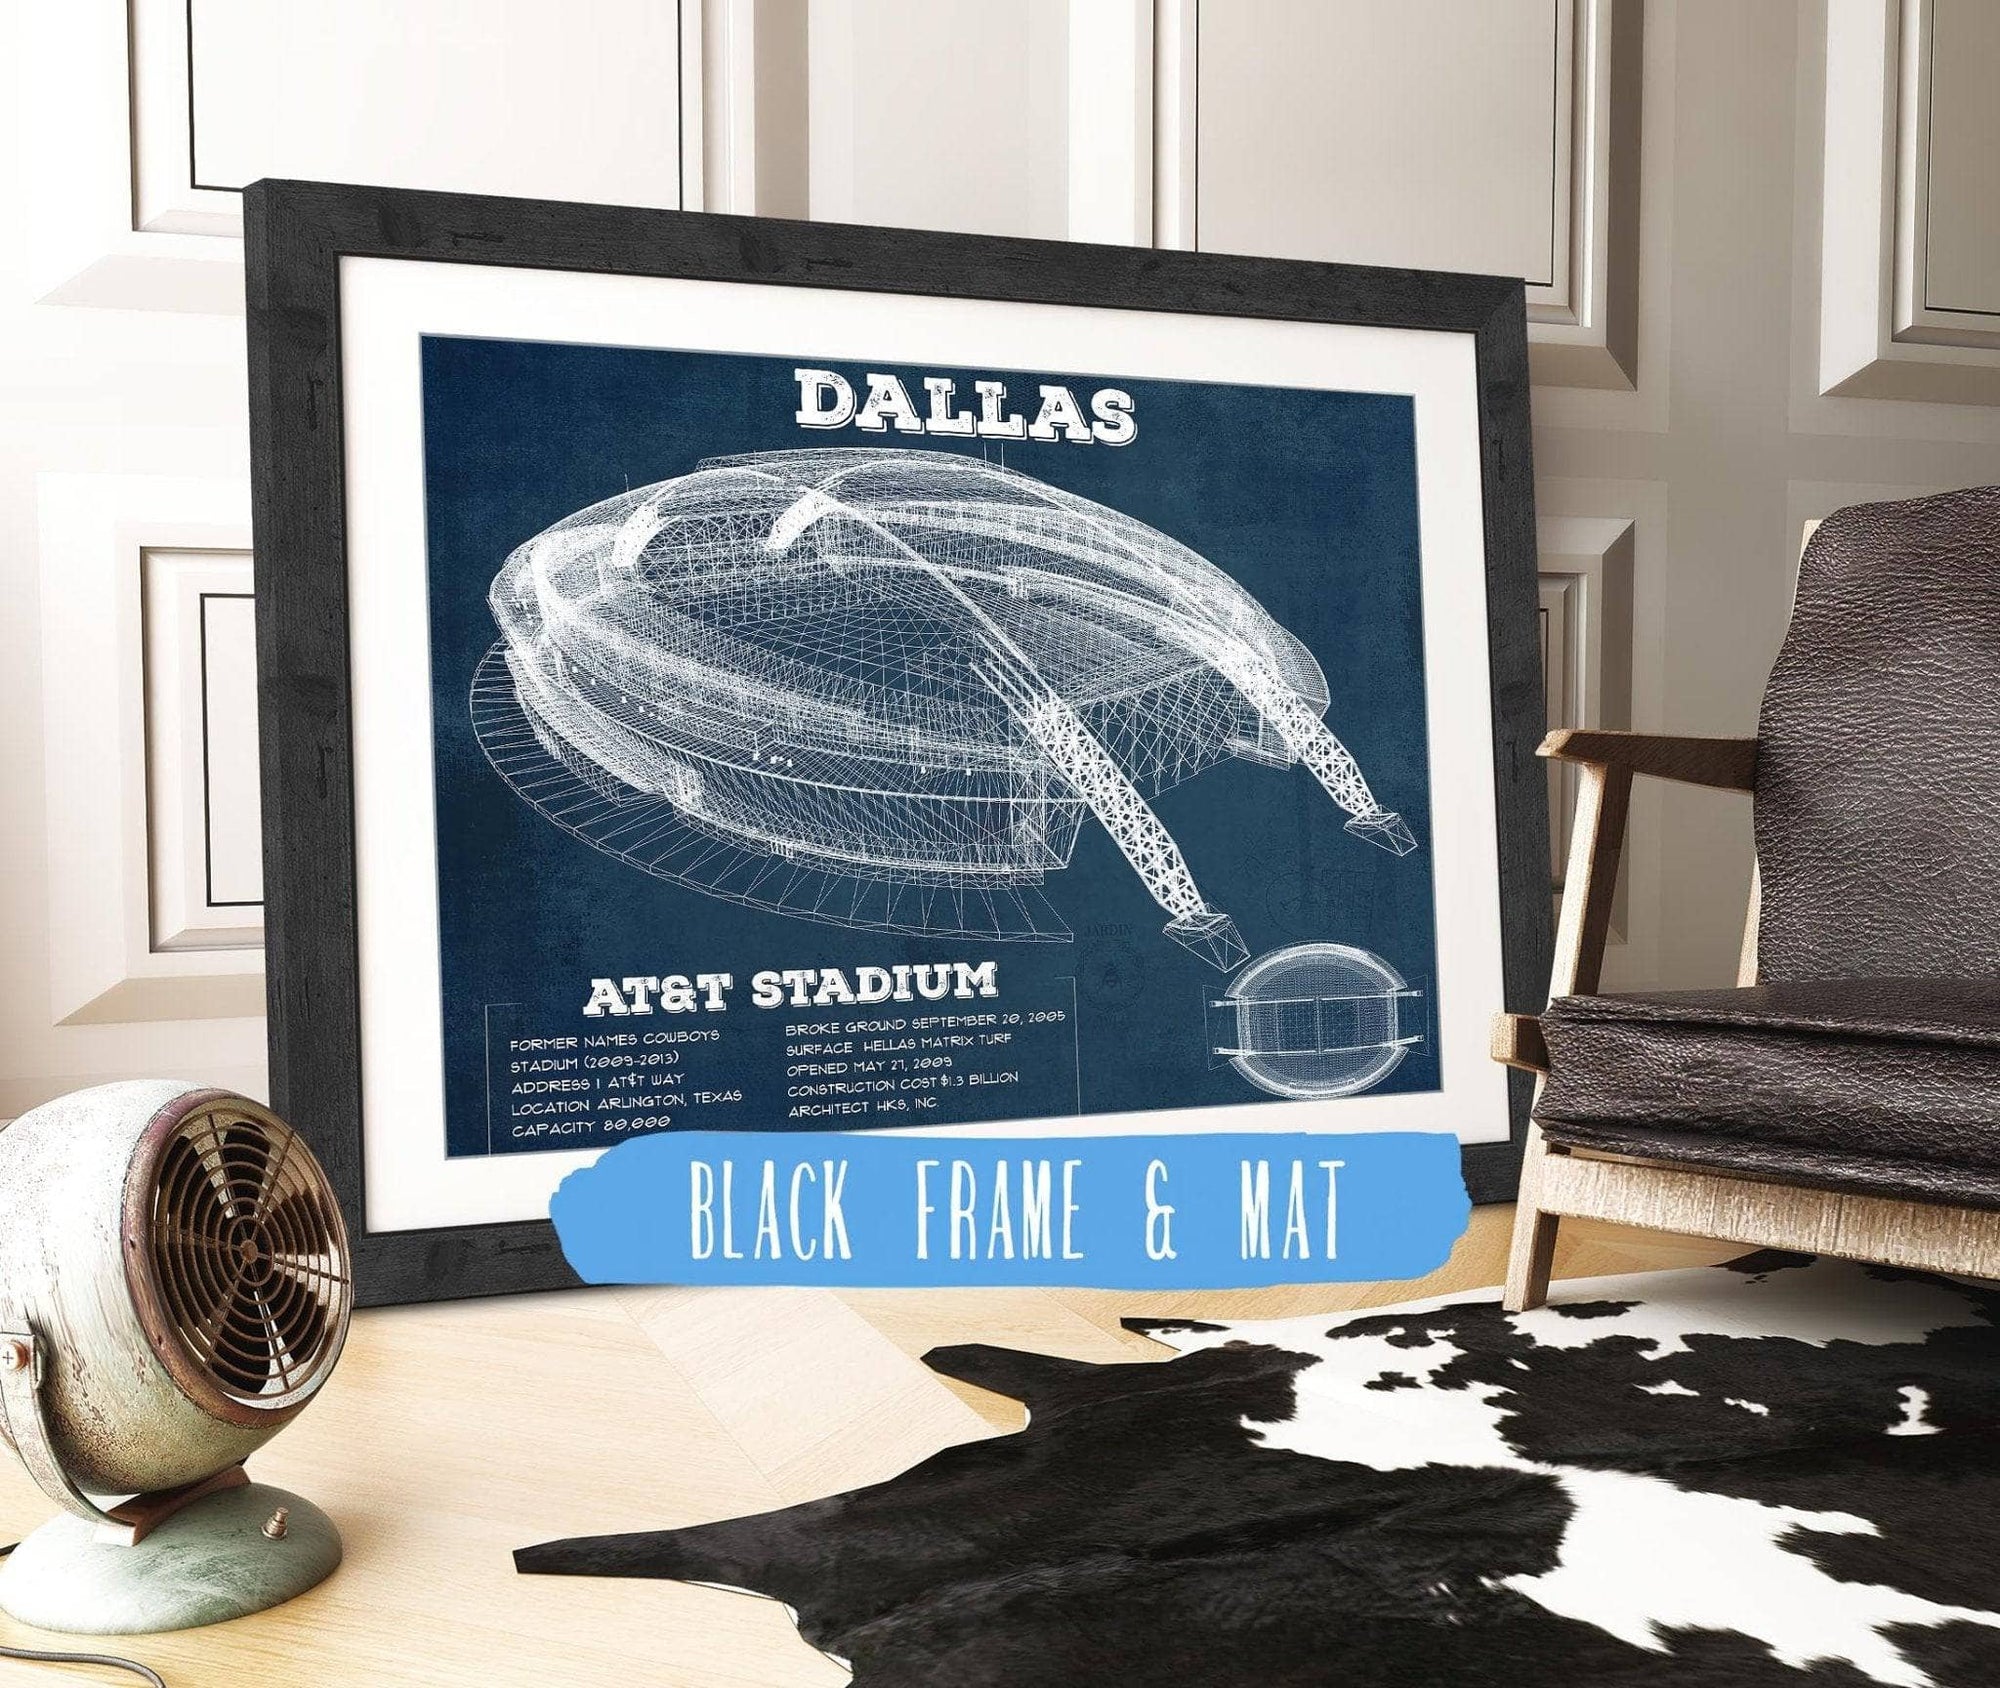 Cutler West Pro Football Collection 14" x 11" / Black Frame & Mat Dallas Cowboys - AT&T Stadium - Vintage Football Print 667011899-TOP